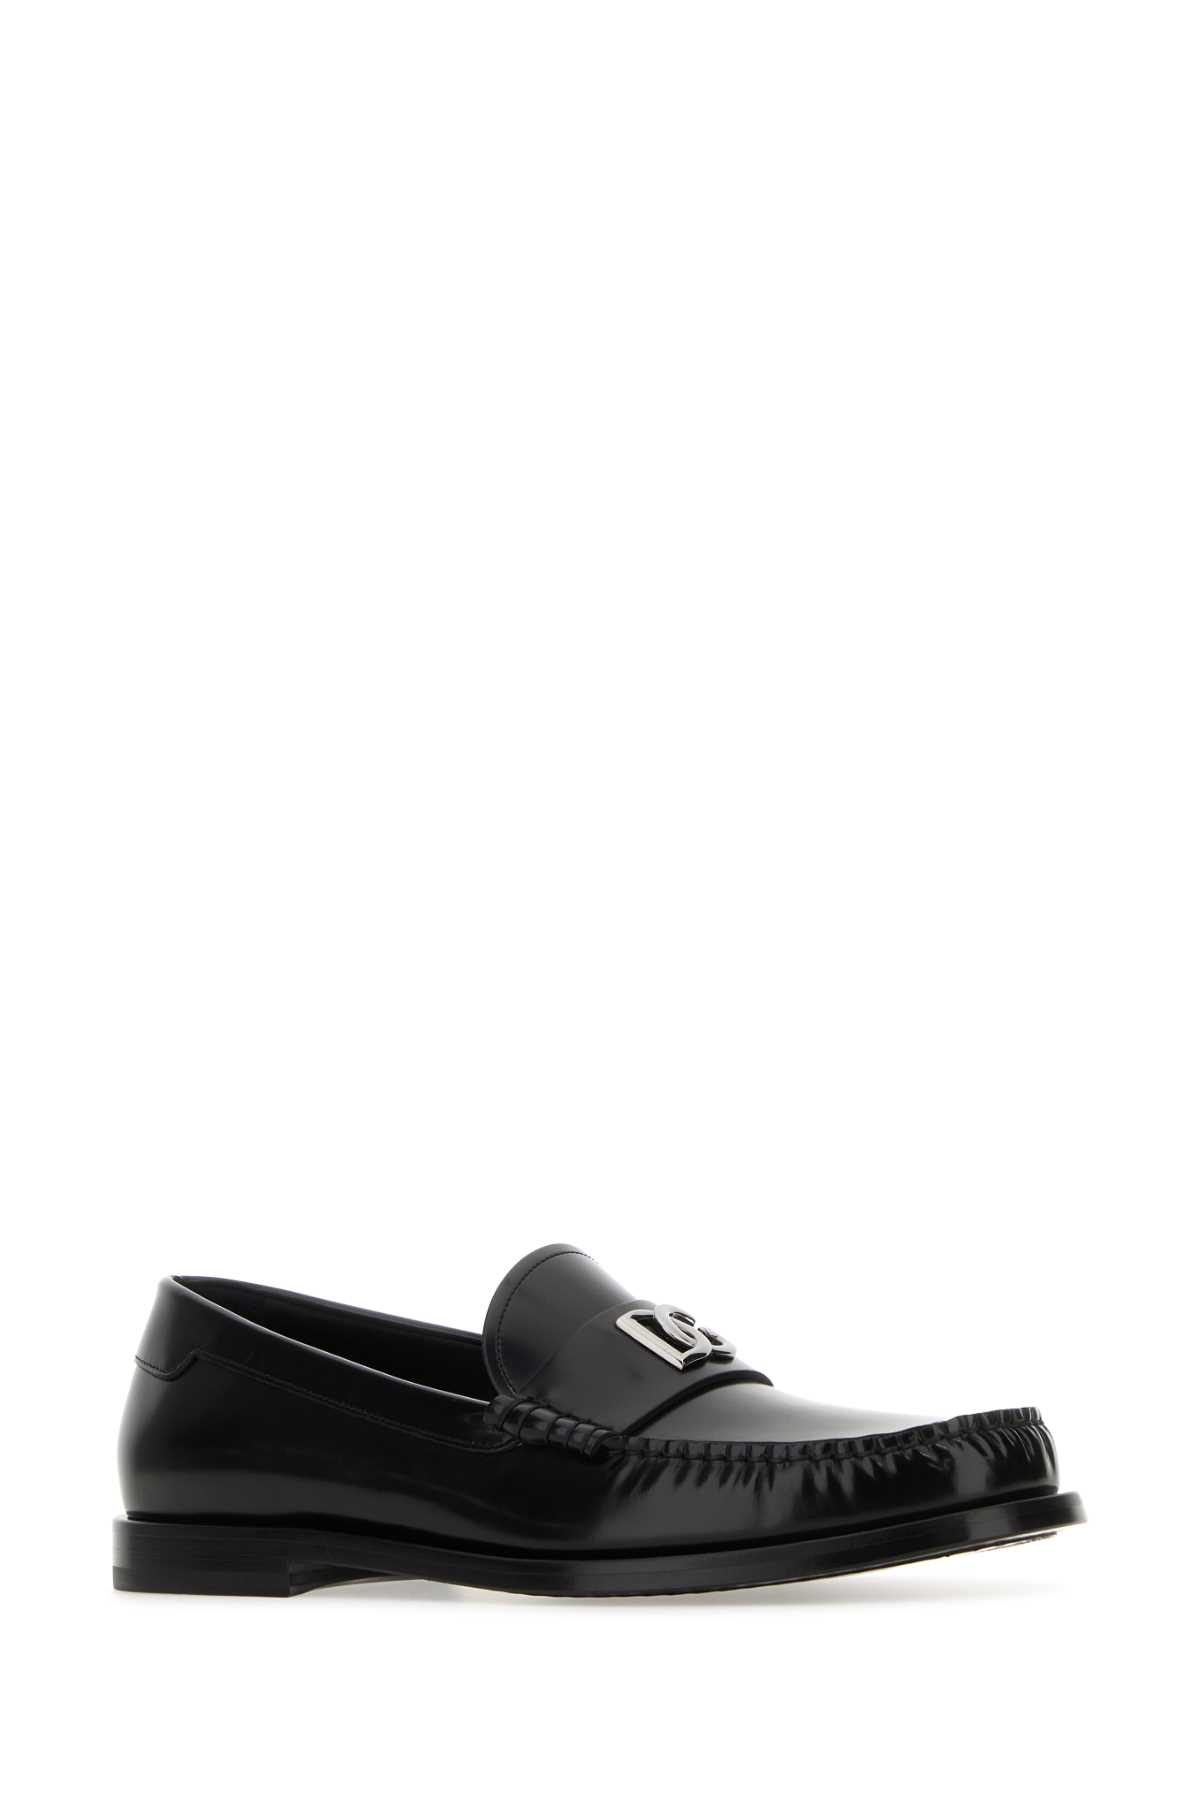 Dolce & Gabbana Black Leather Loafers In Nero